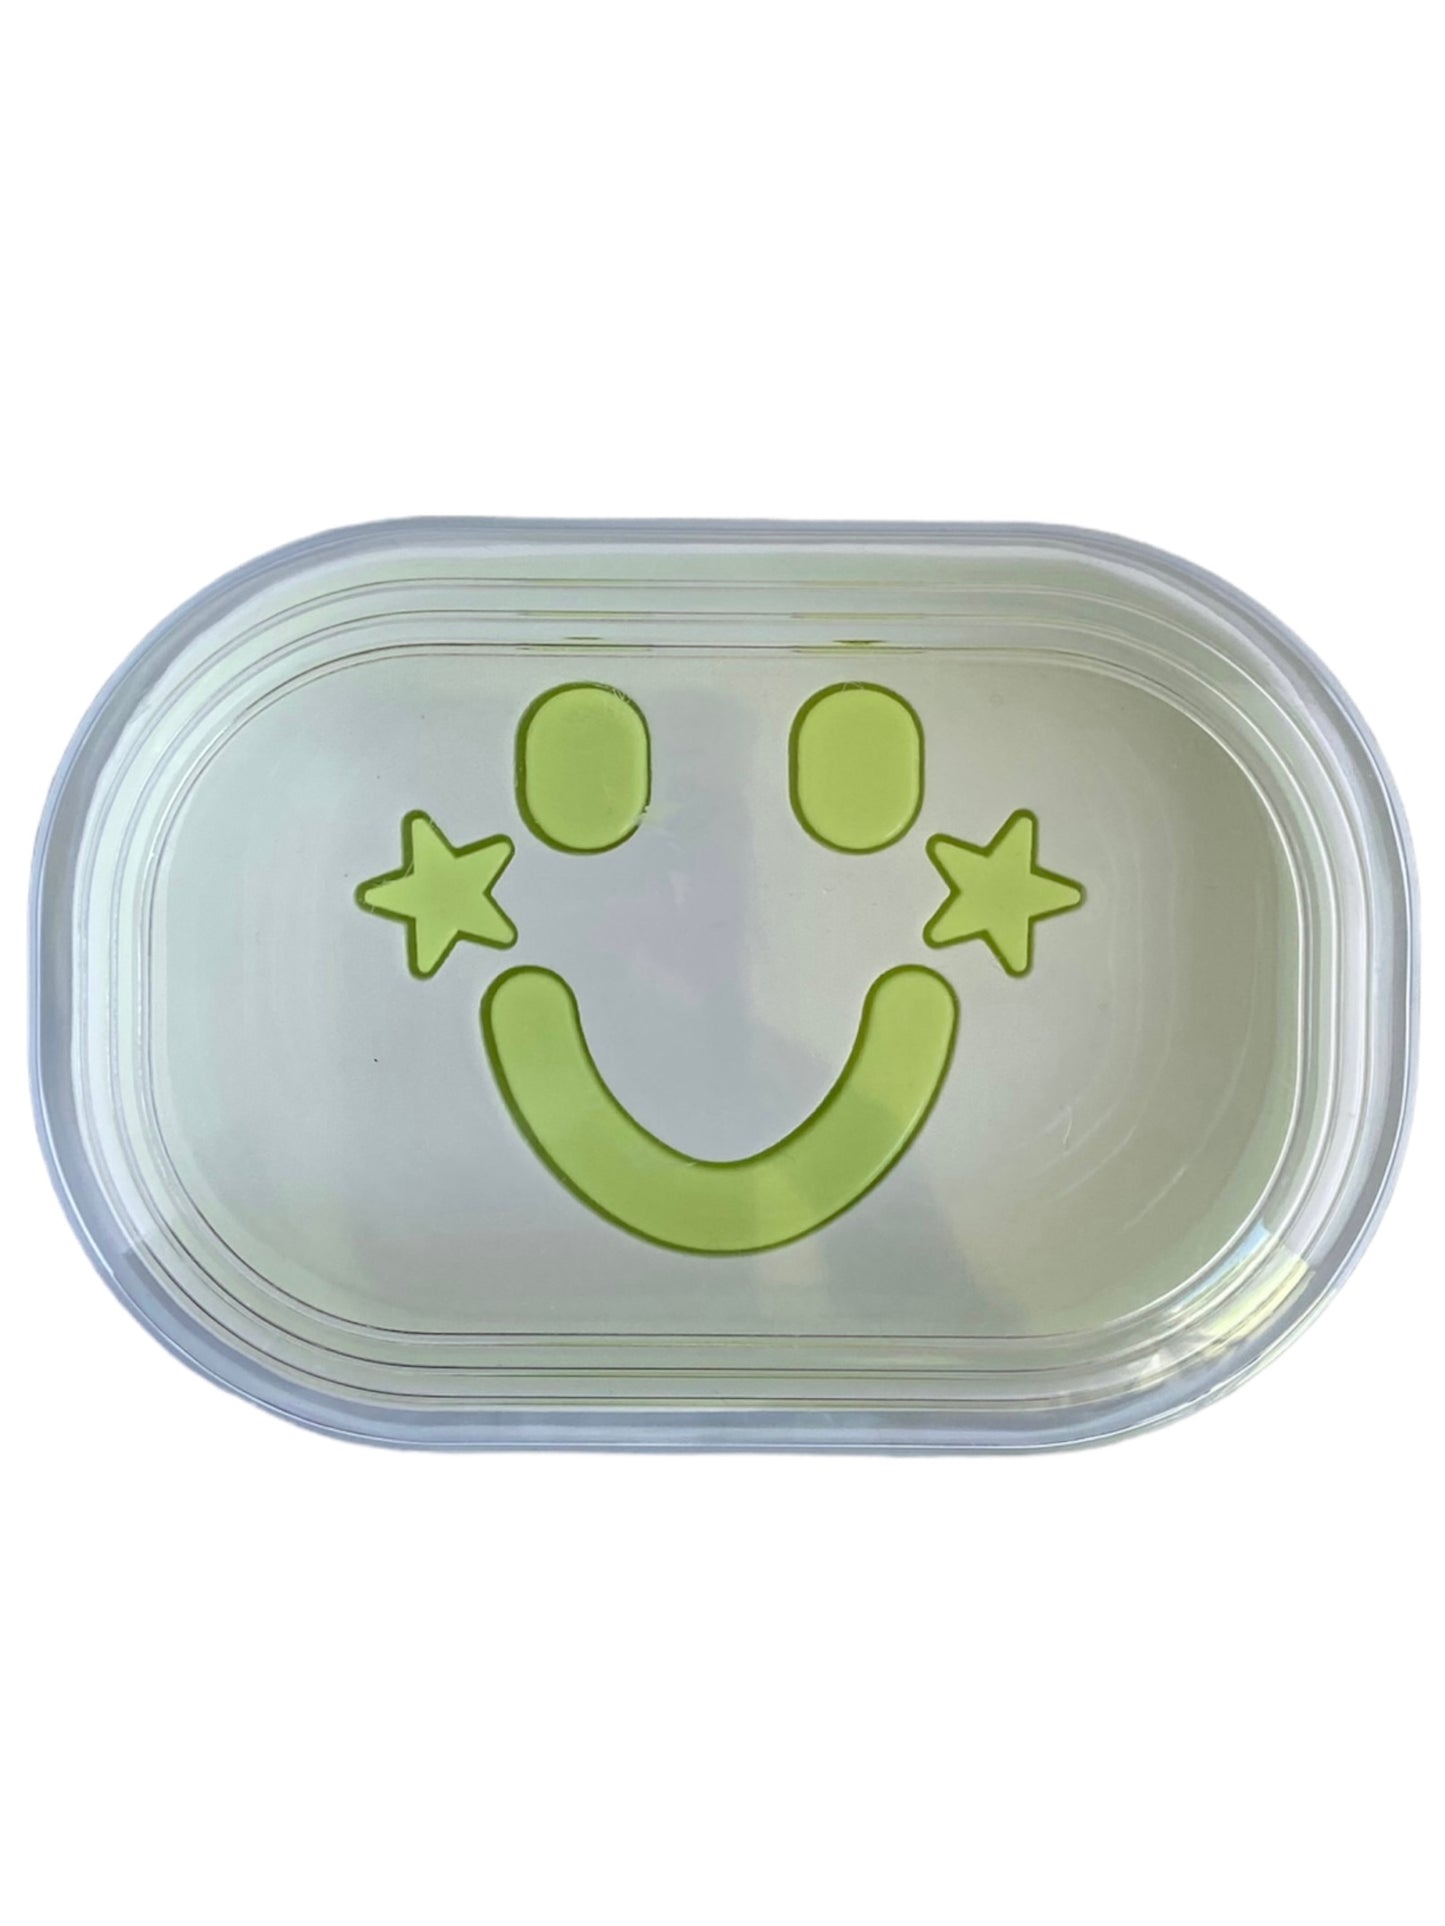 Smiley Face Soap Dish with Starry Delights